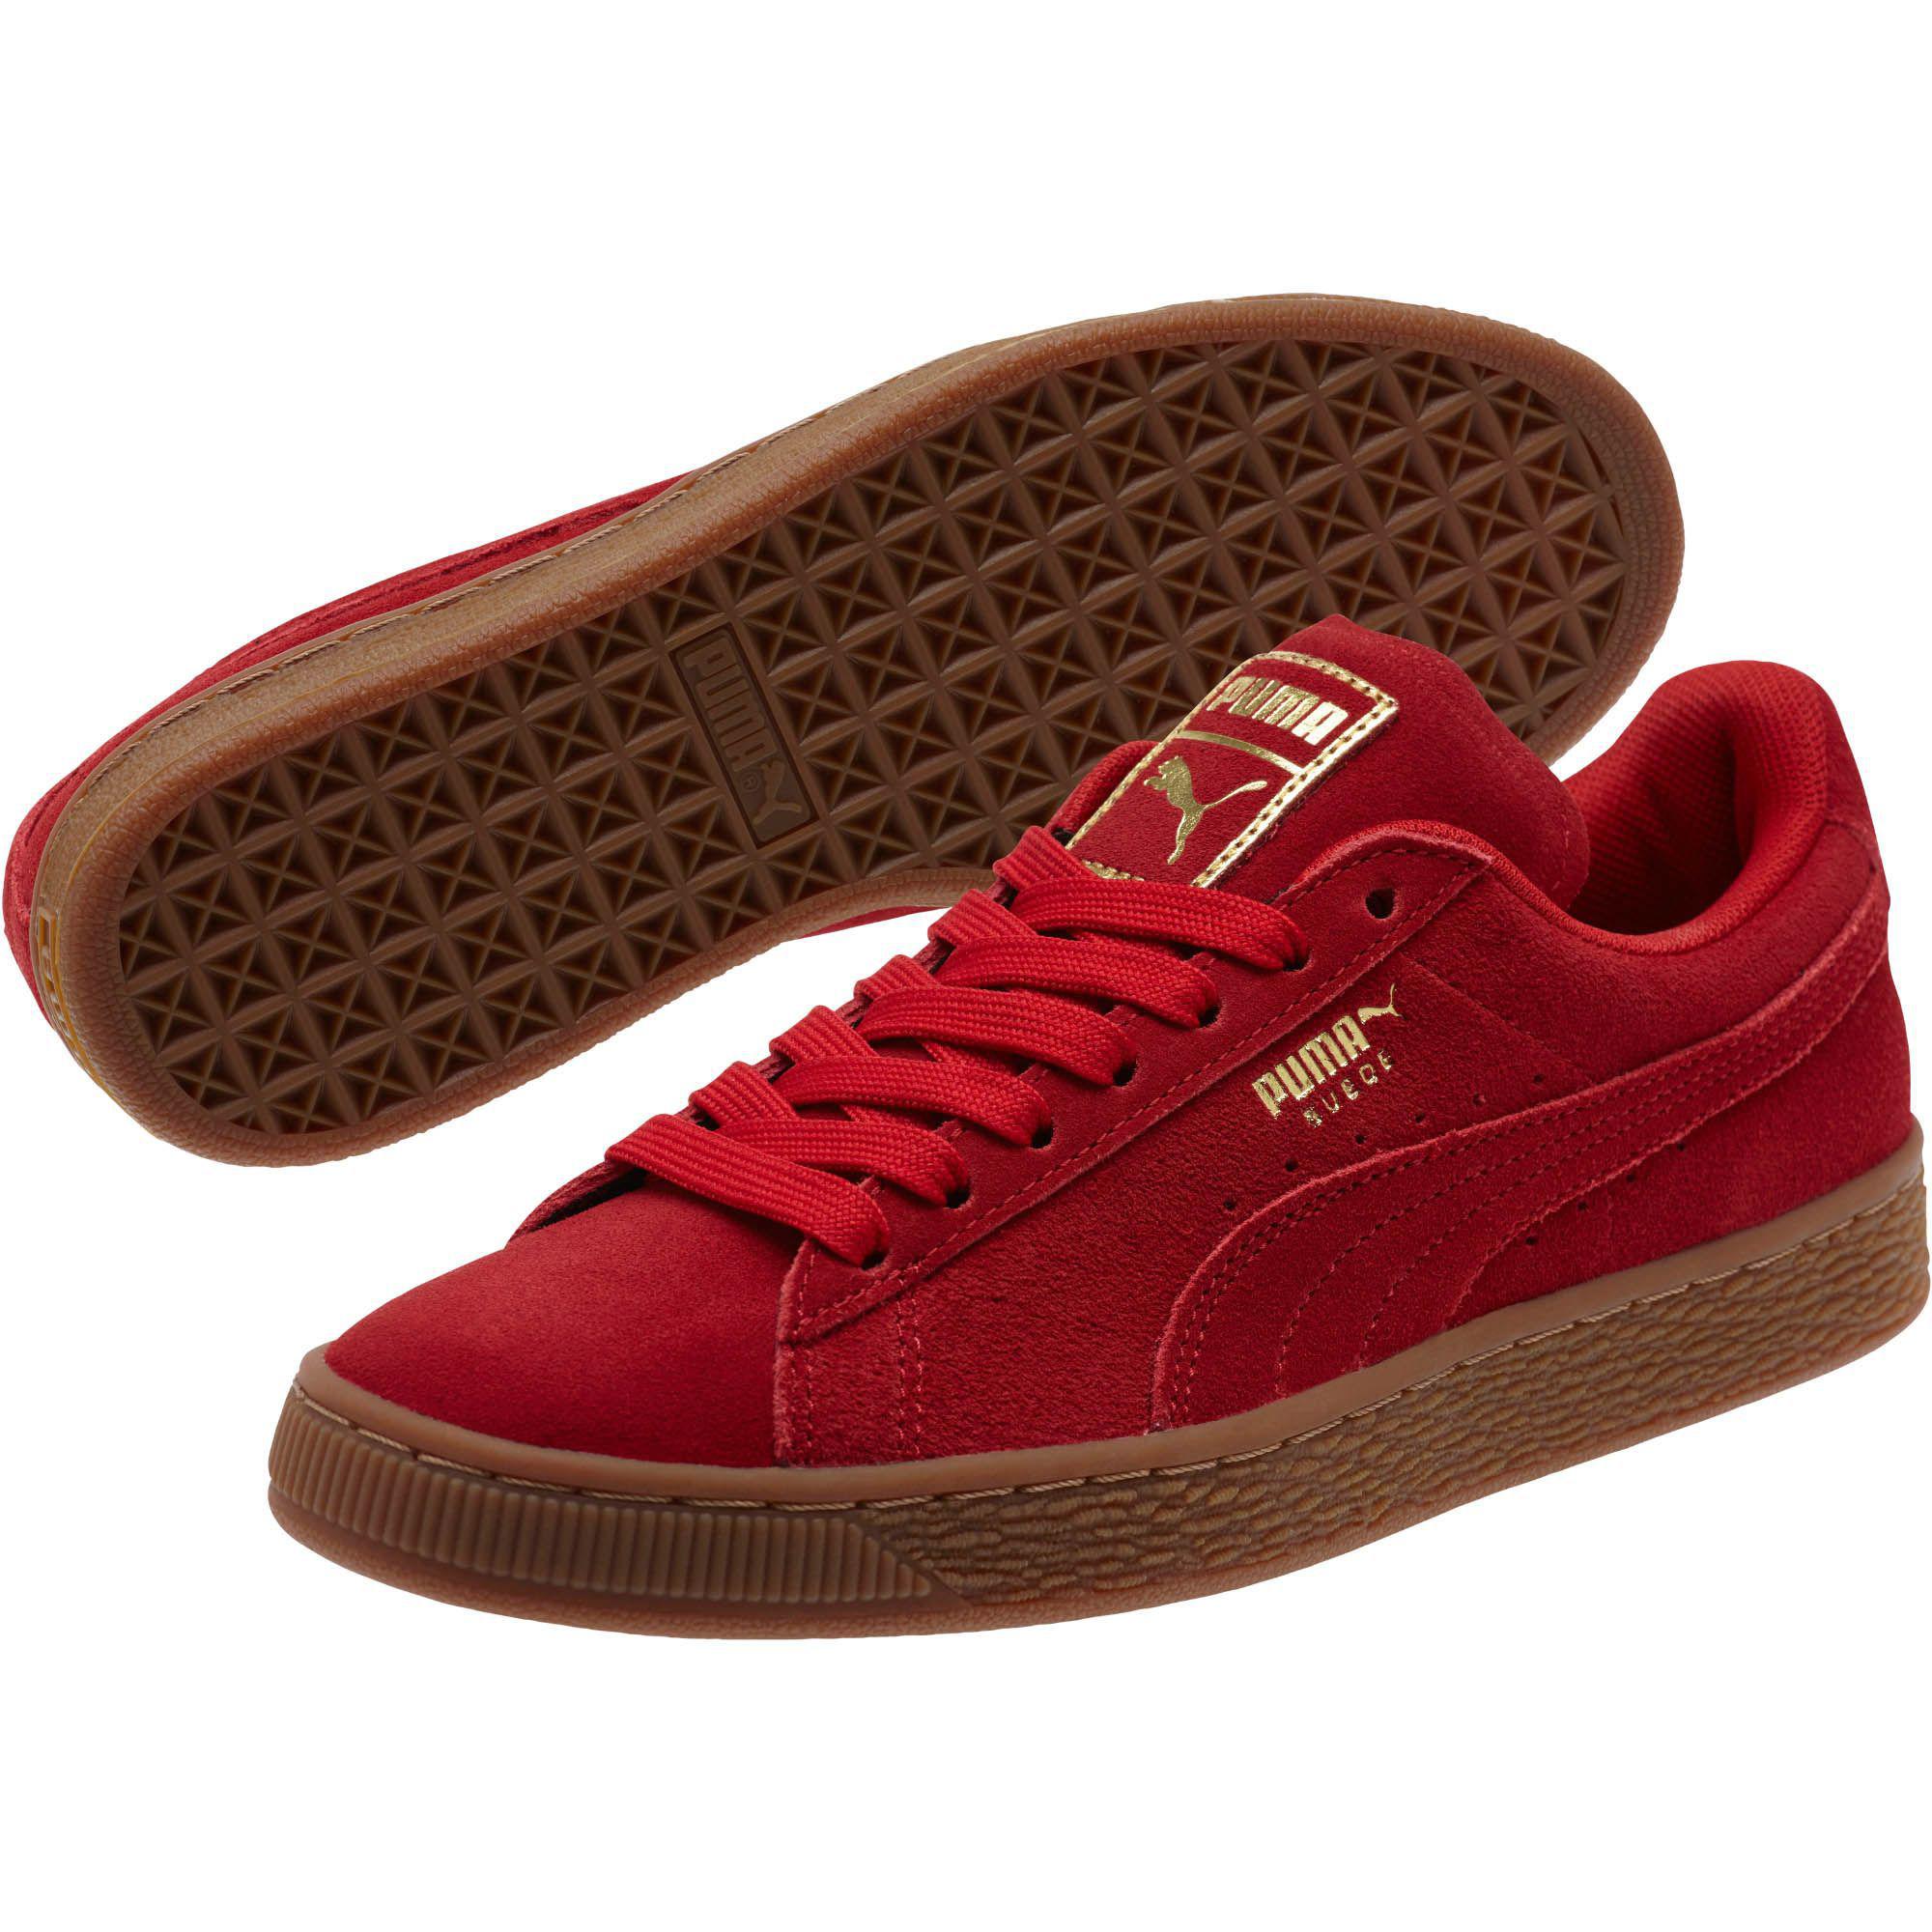 PUMA Suede Classic Gold Women's Sneakers in Red | Lyst